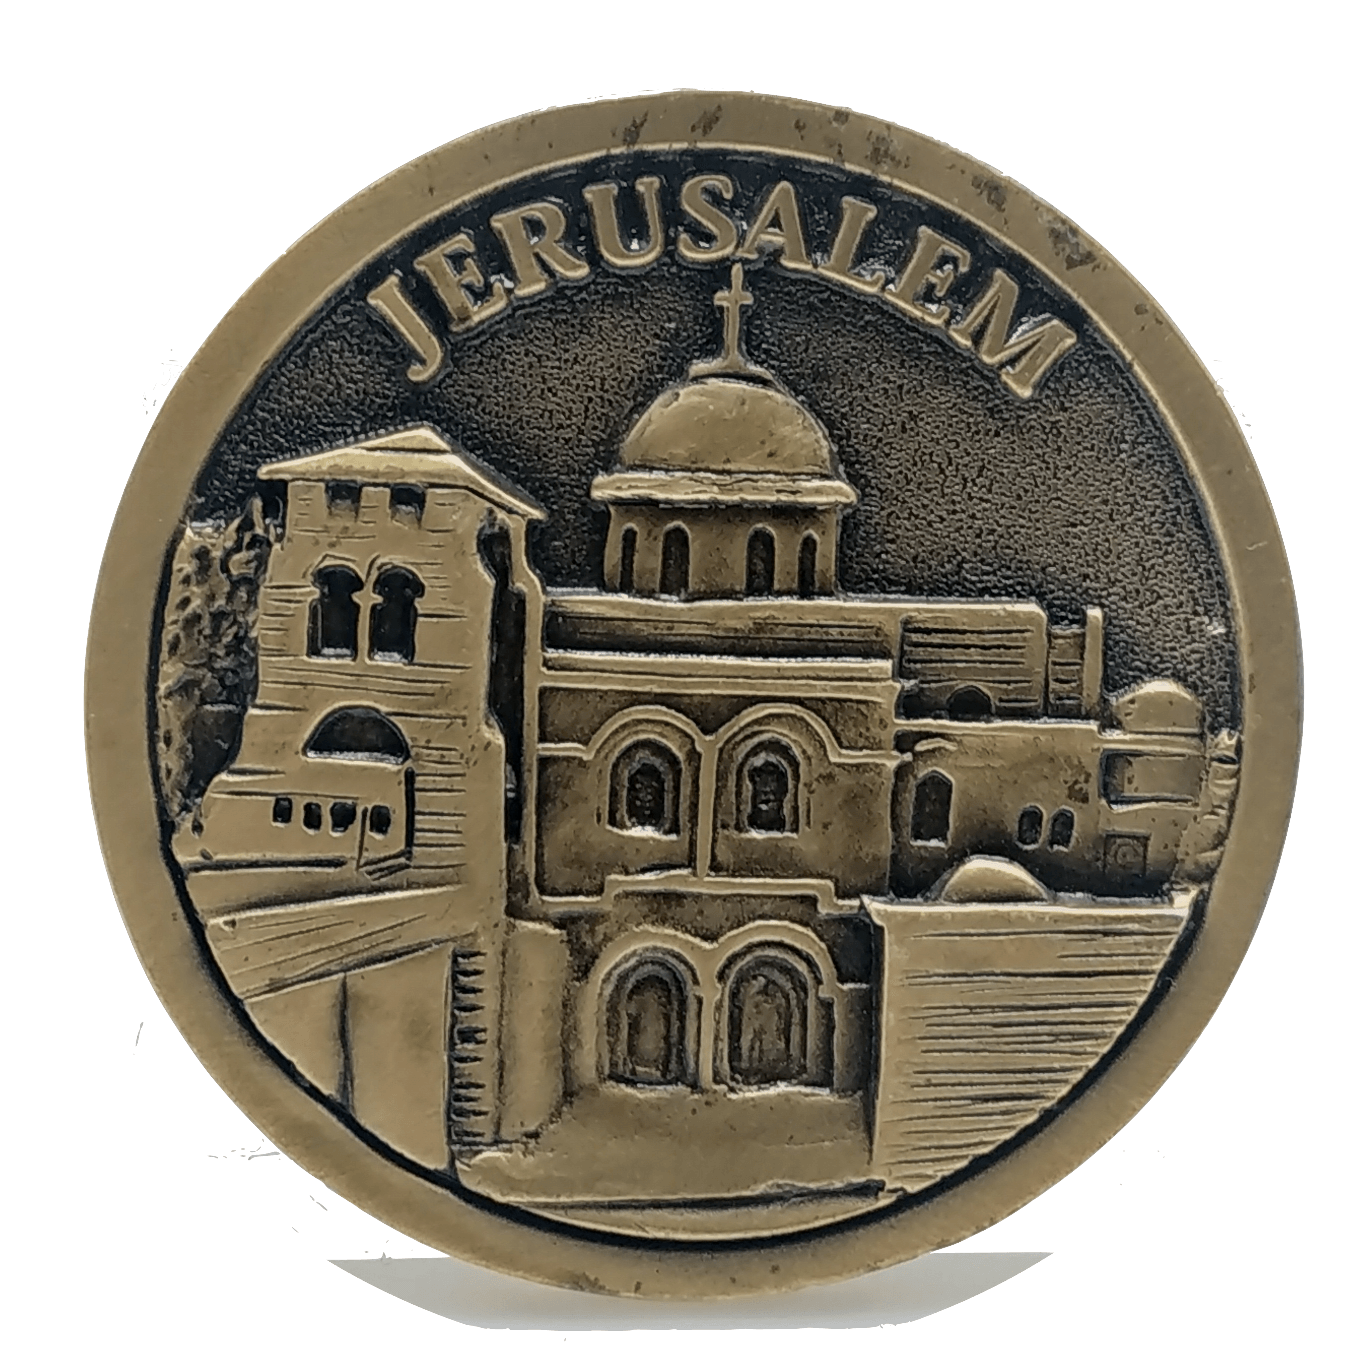 Holy Land Israel Church Coins: Church of The Holy Sepulchre, Basilica of The Annunciation, Church of The Nativity Coin Israel Souvenir from The Holyland (Silver Color) - Spring Nahal